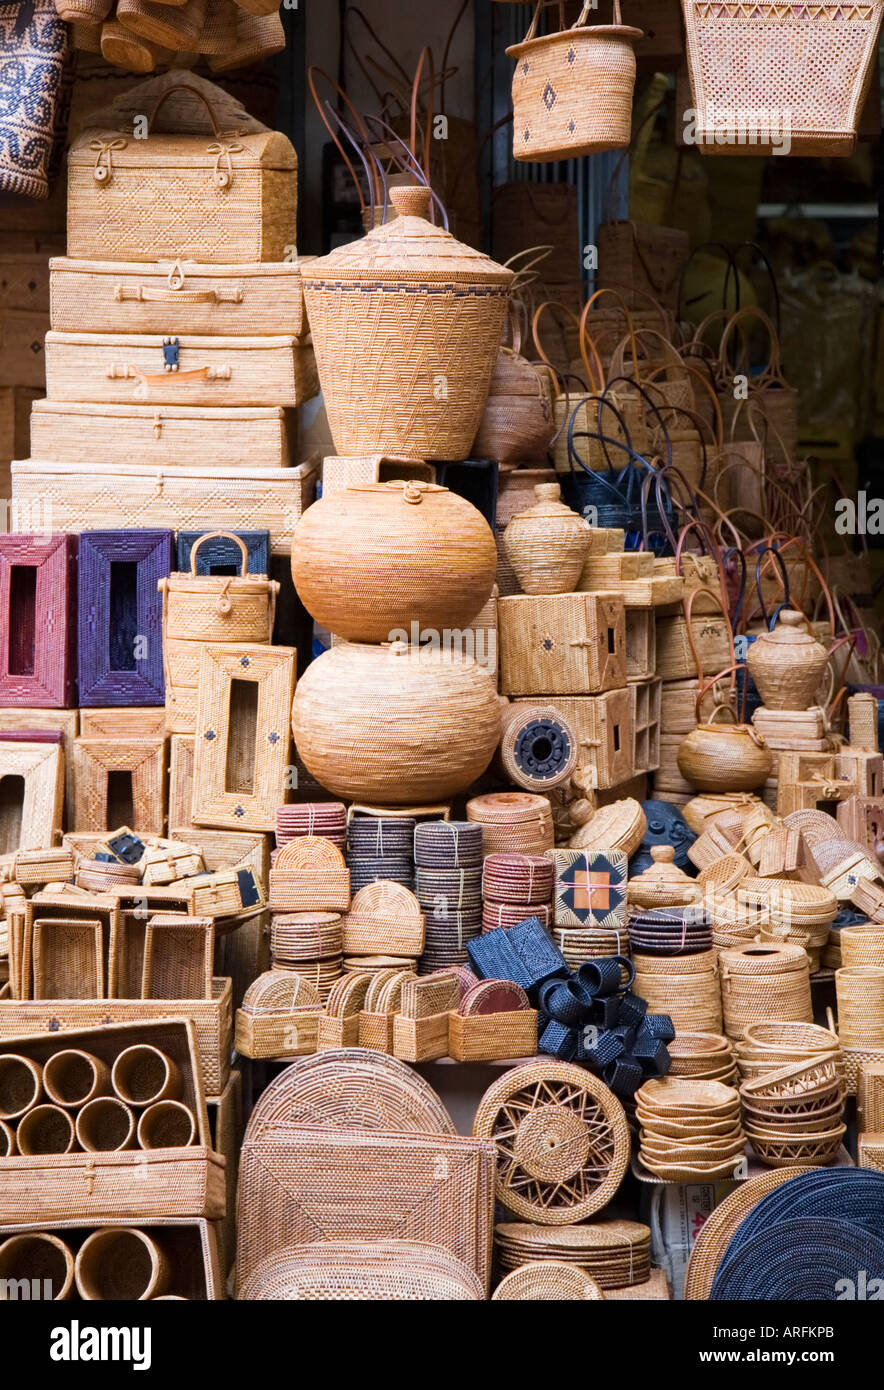 Traditional local handmade wicker baskets for sale in a local craft shop, Bali, Indonesia Stock Photo